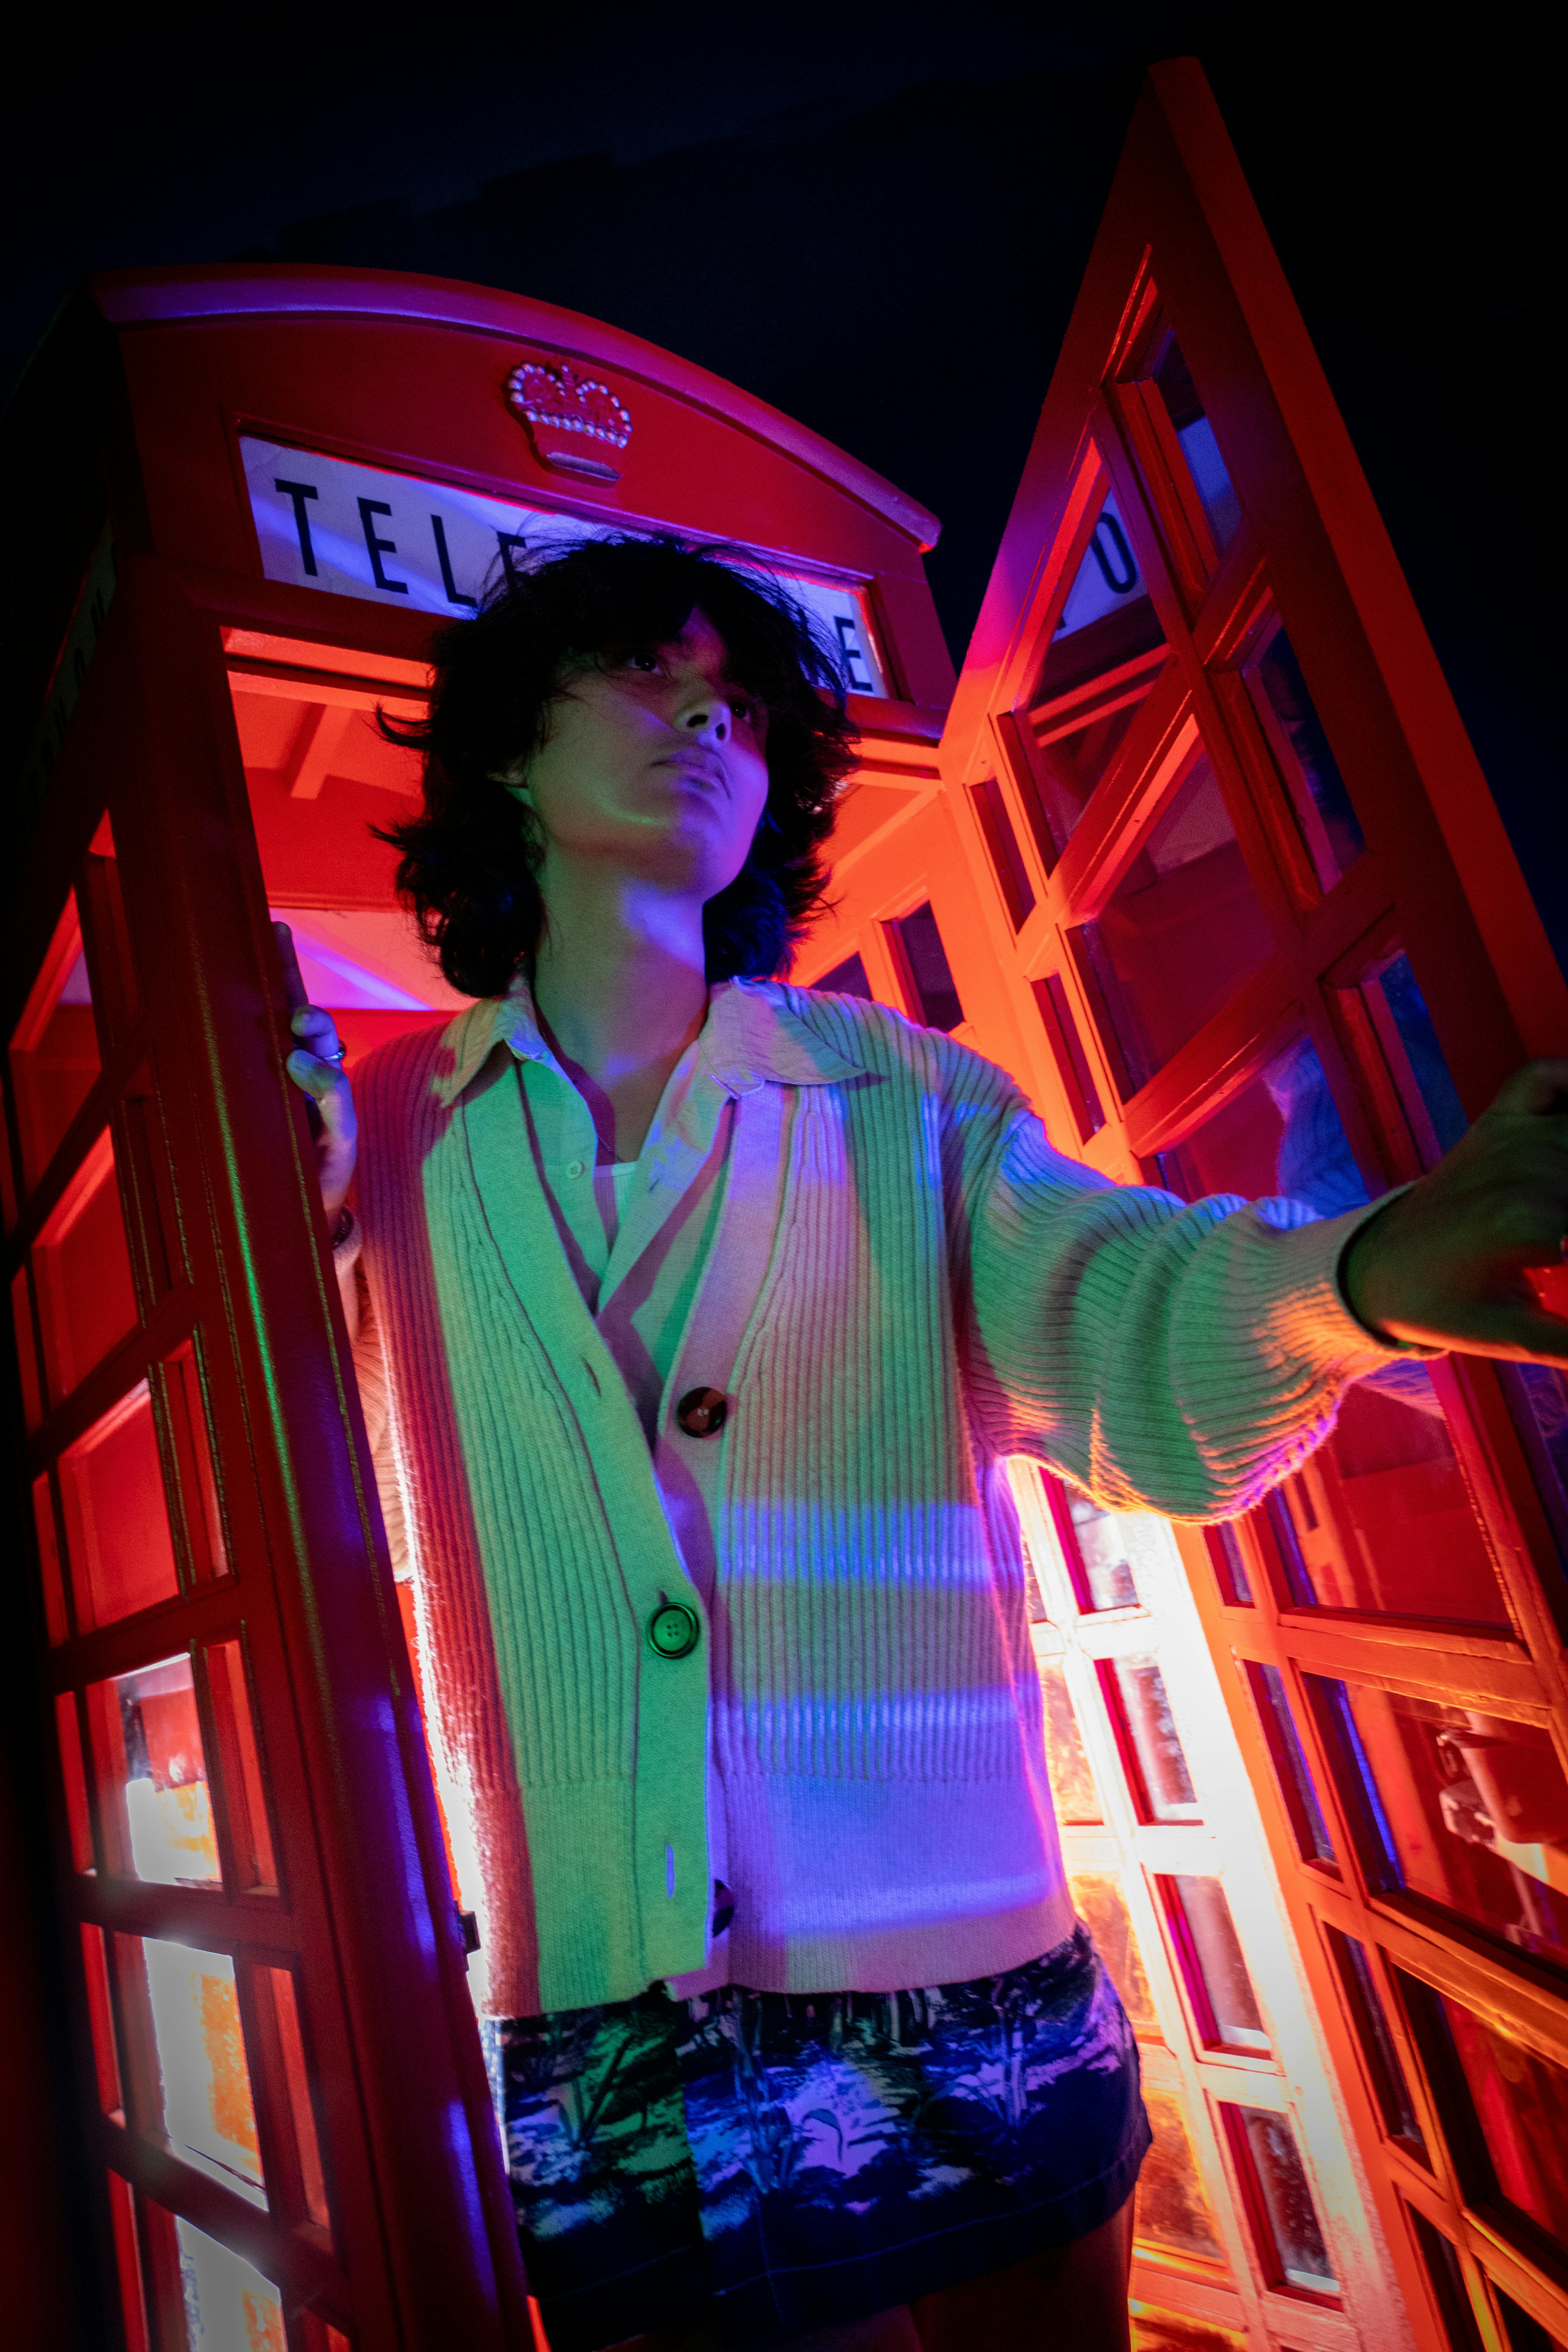 a woman standing in a red telephone booth